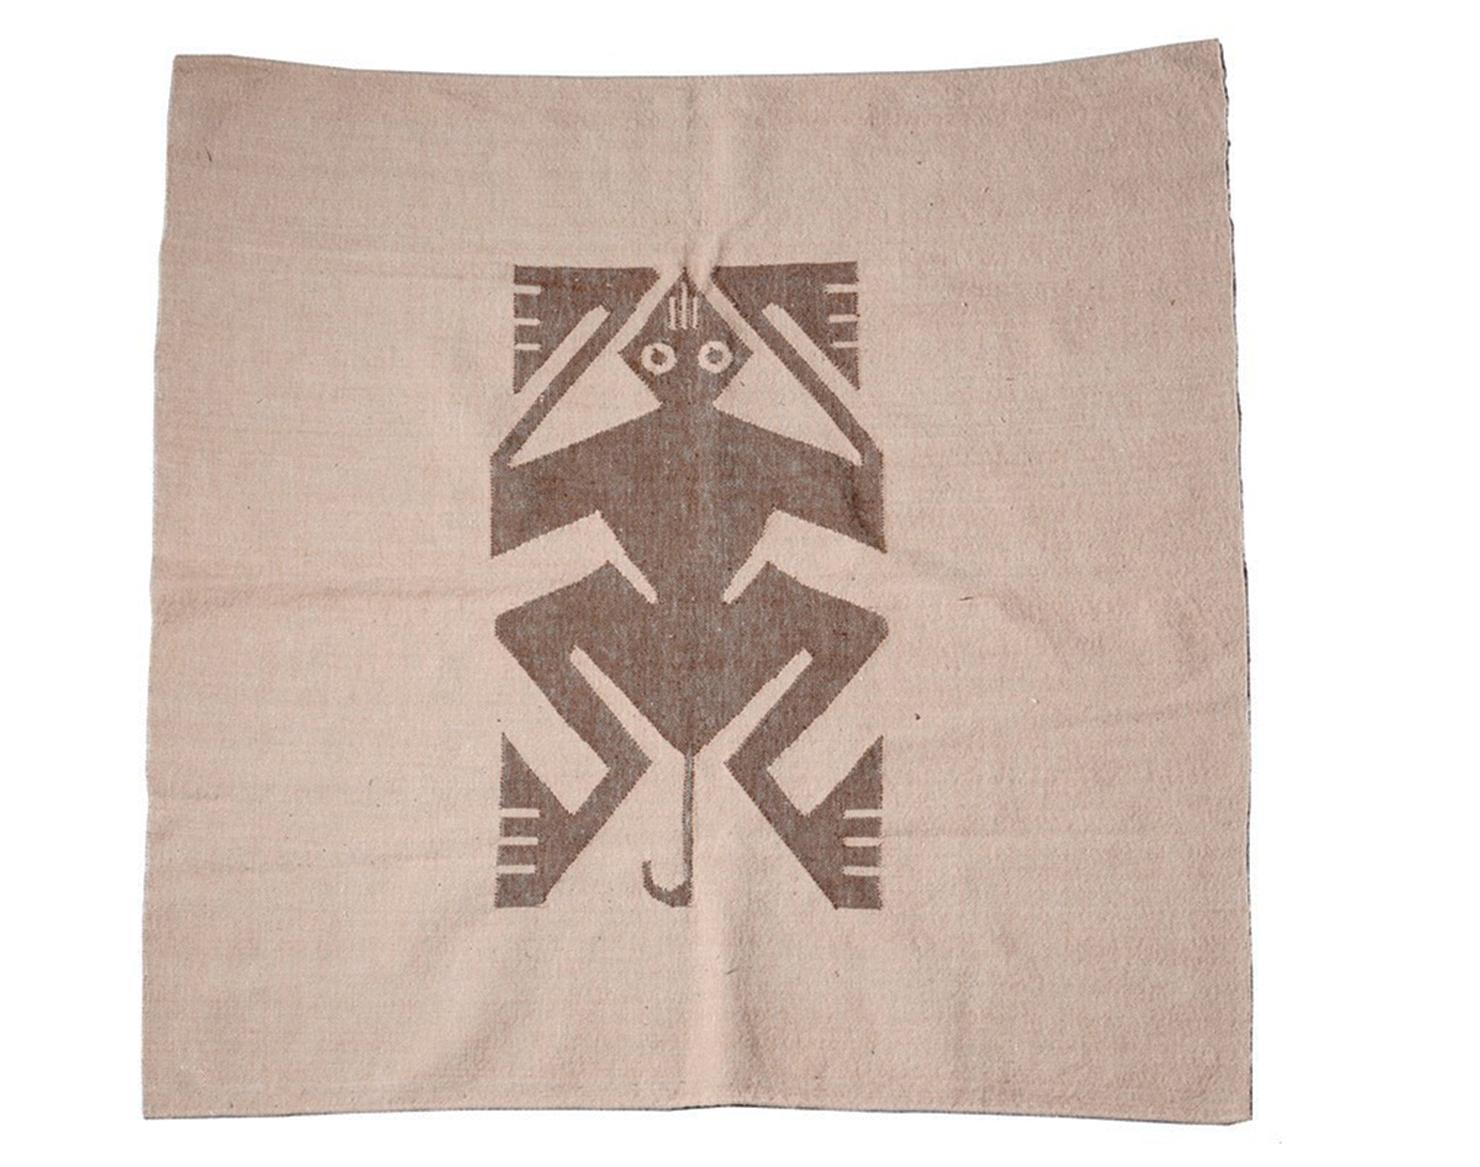 A Original vintage South American weaving by the artist Jan Schreuder (1904 - 1964)

Jan Founded the 'del Centro da Manufacturas Textiles de Quito,'Ecuador, in 1952,
with the aim to revive and improve Indigenous weaving techniques.
Drawing on